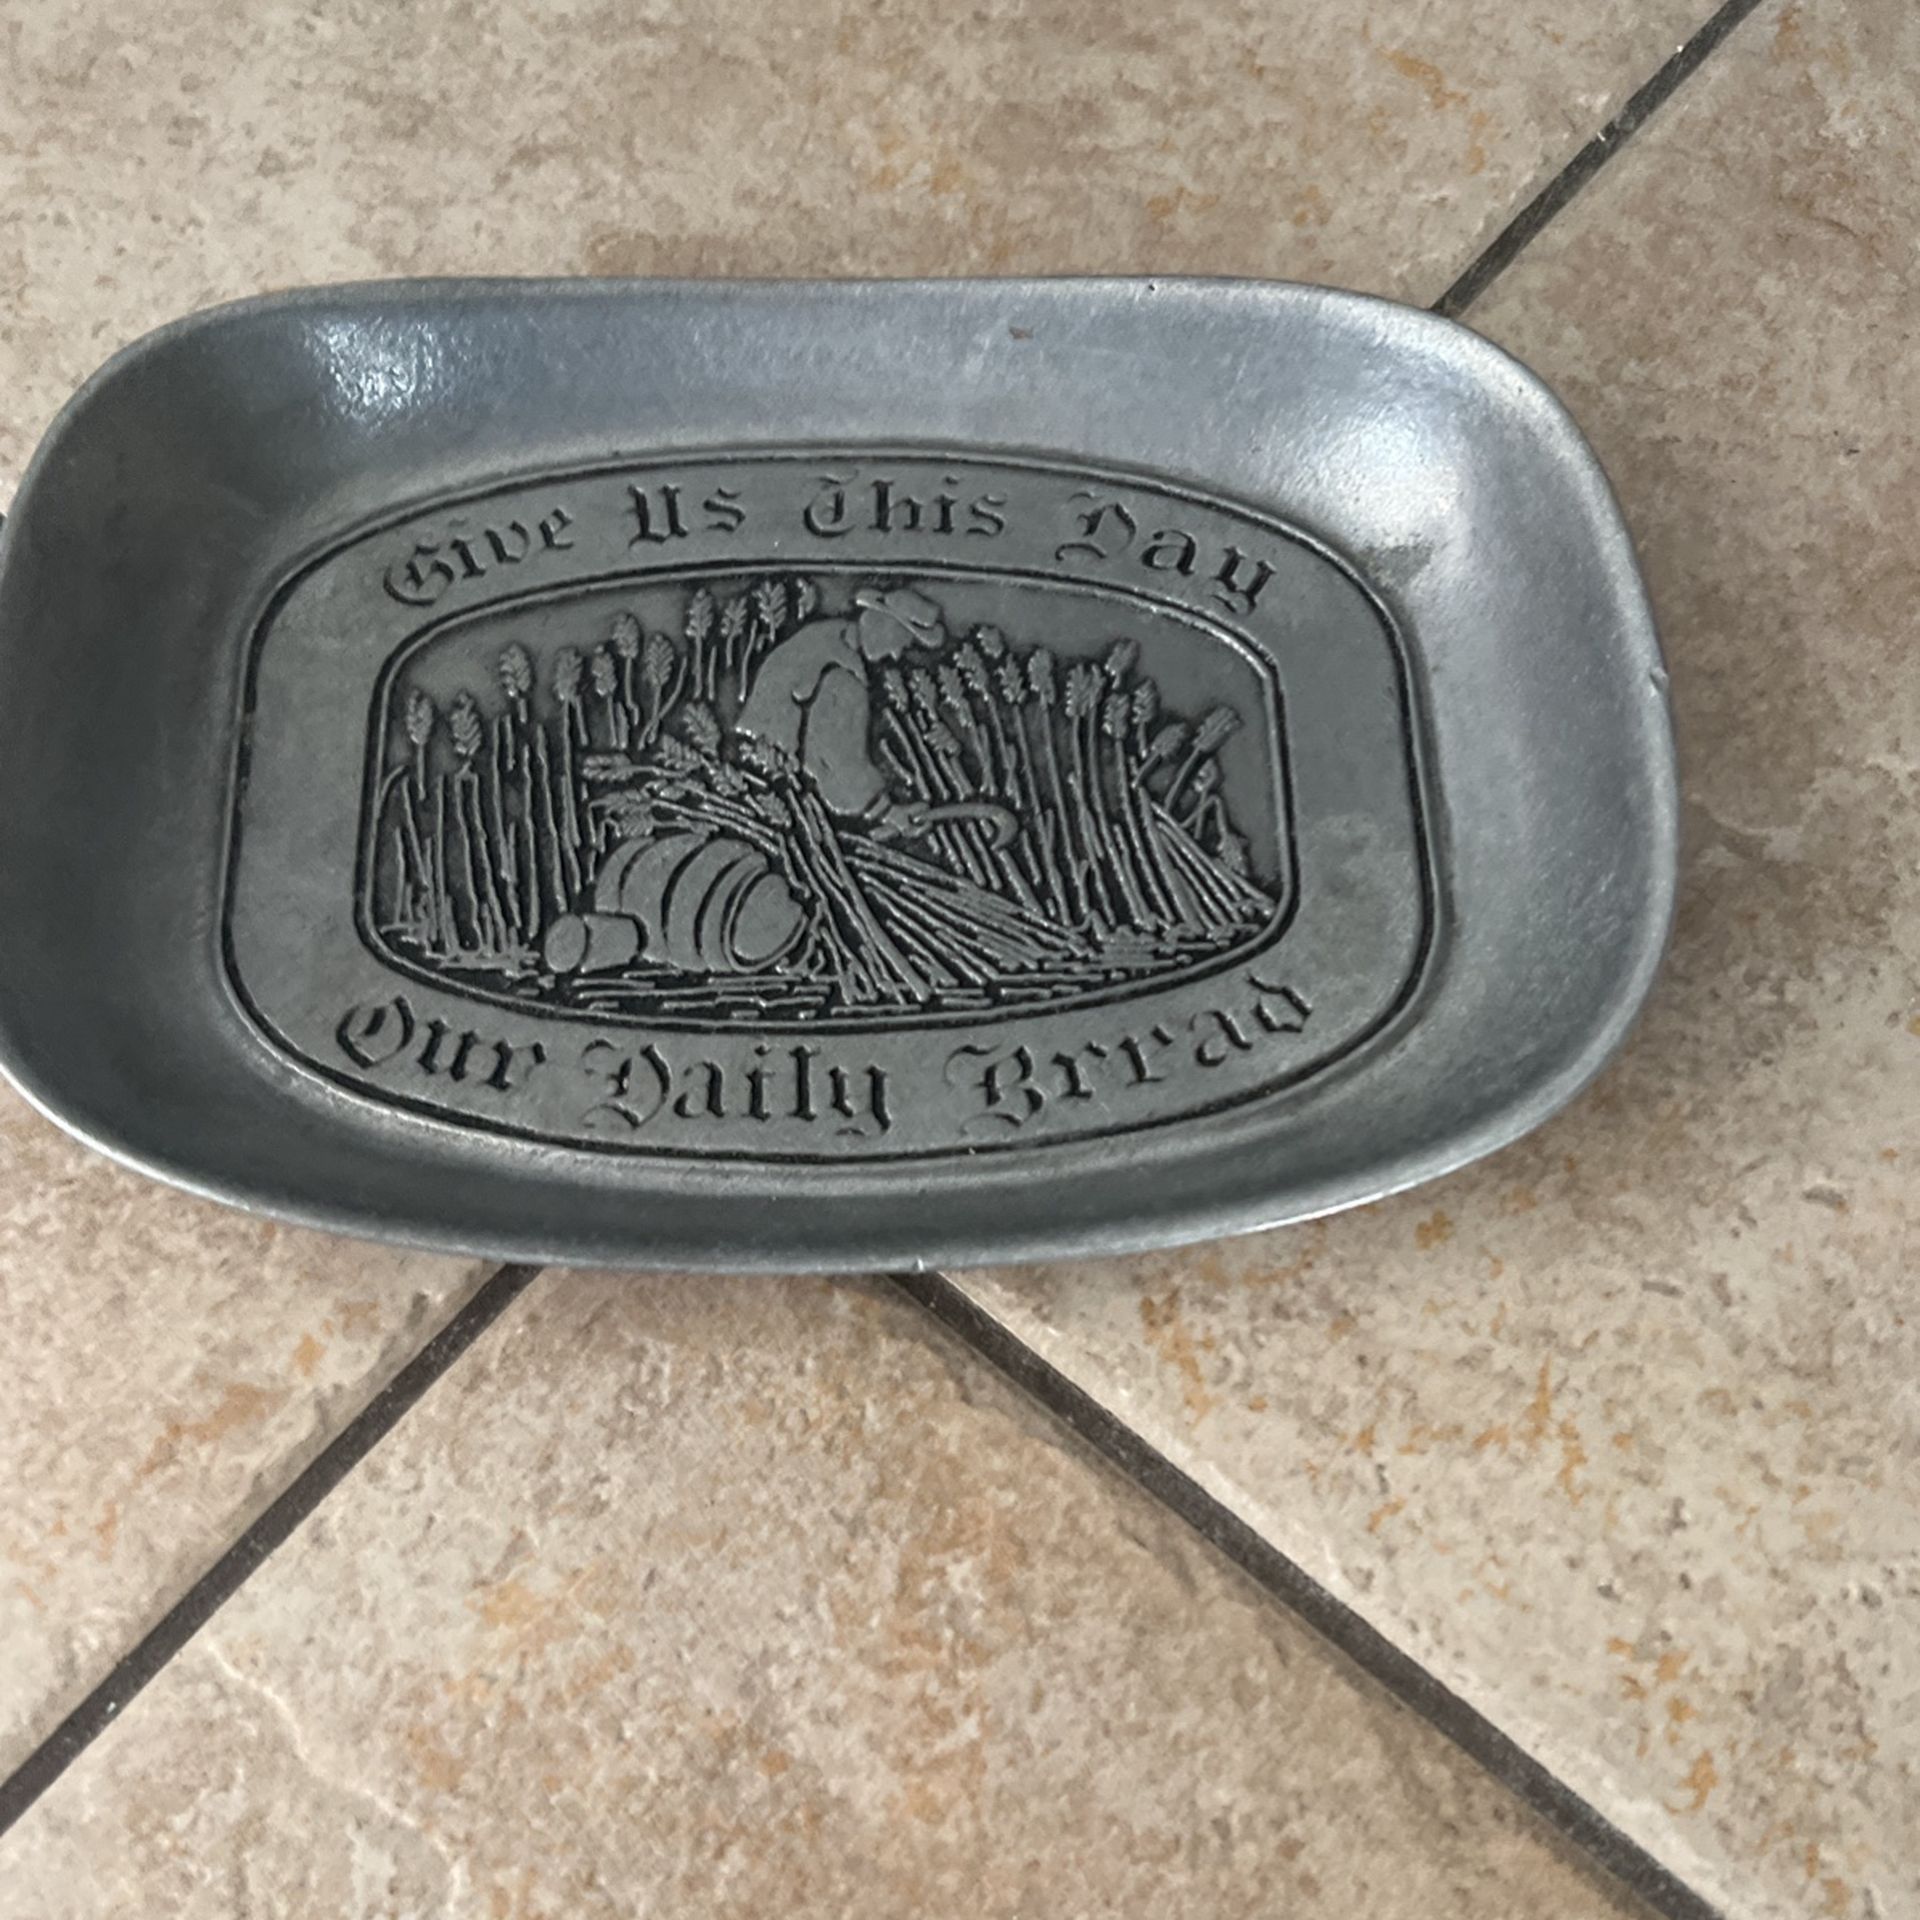 Pewter Dish- Give Is This Day Our Daily Bread 